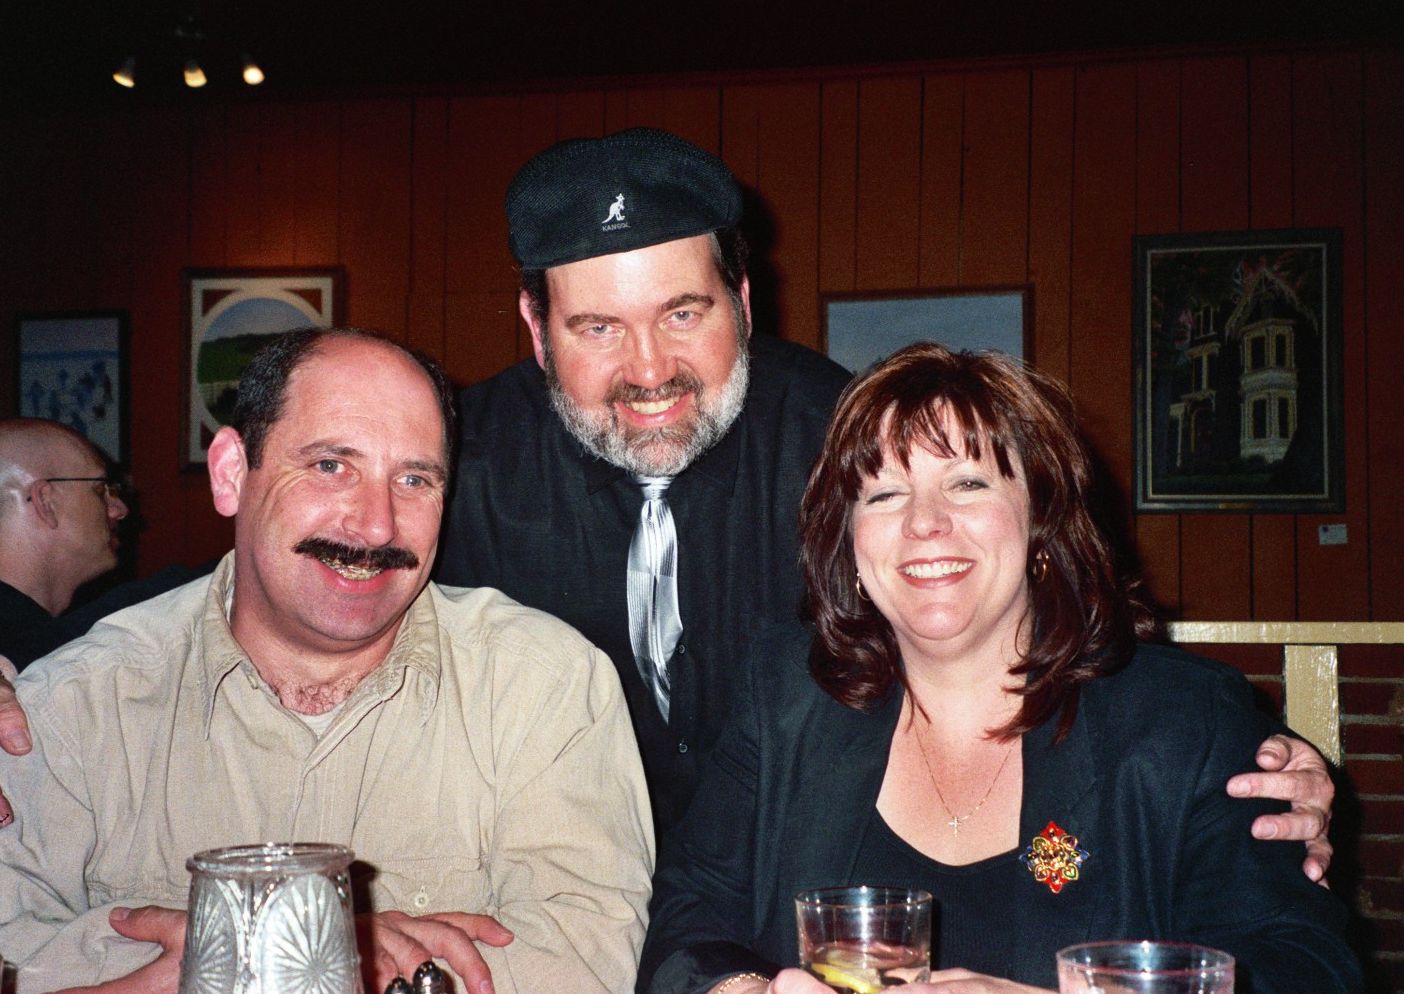 Fan's at Scott's Grill Mediterranean
Steve & Charlene from the Trefz & Bowser Funeral Home in Hummelstown love the Jazz Me boys...maybe Steve can do some make-up on the Wise Guy to make him look better...
